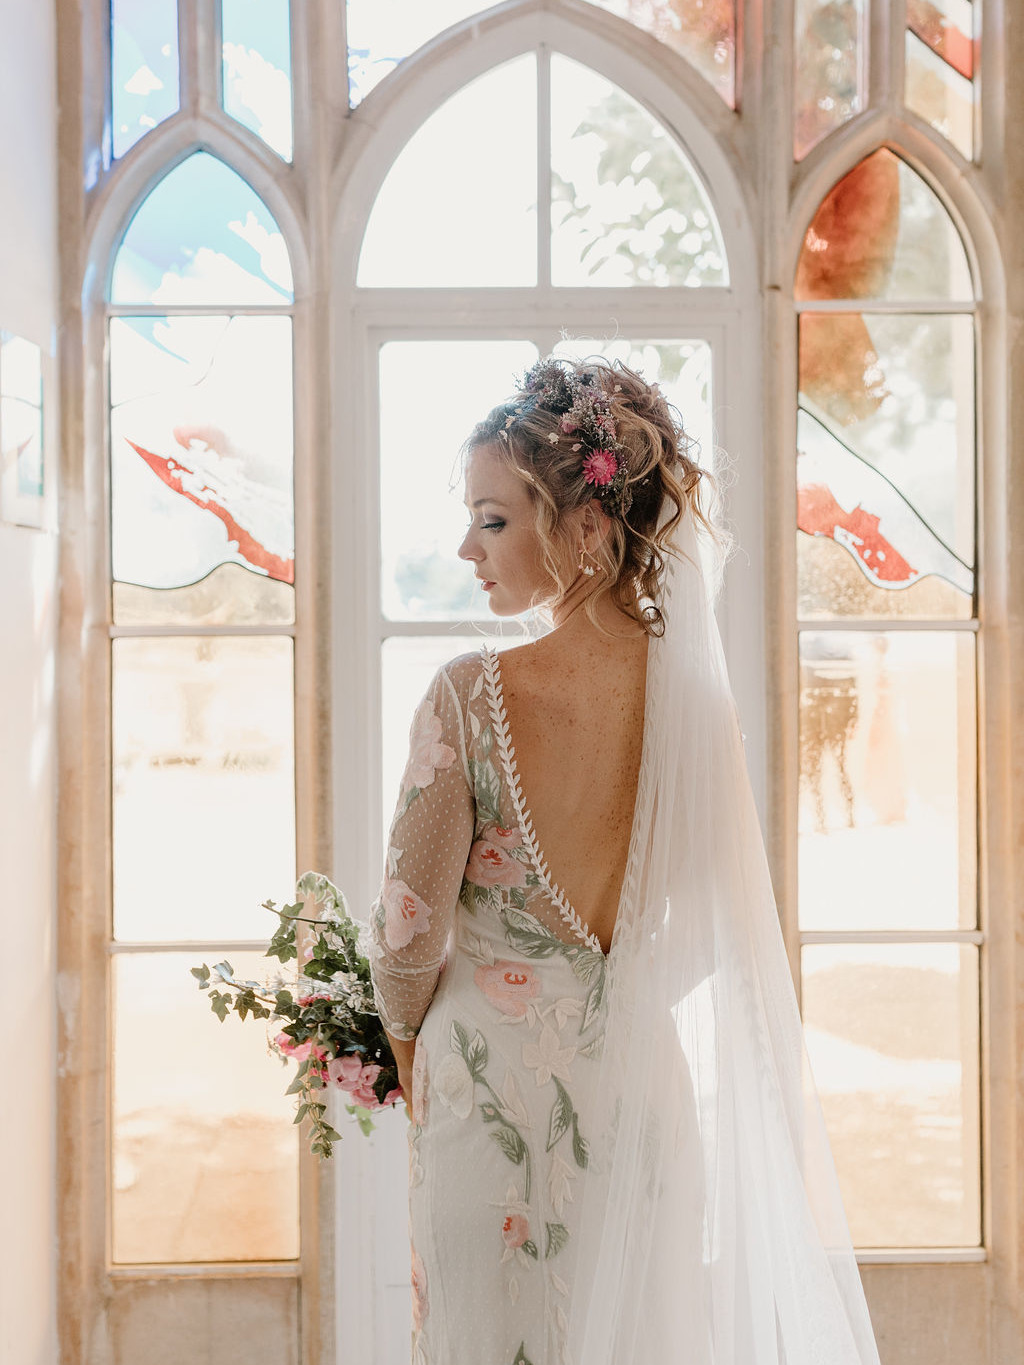 Bride in front of stained glass windows